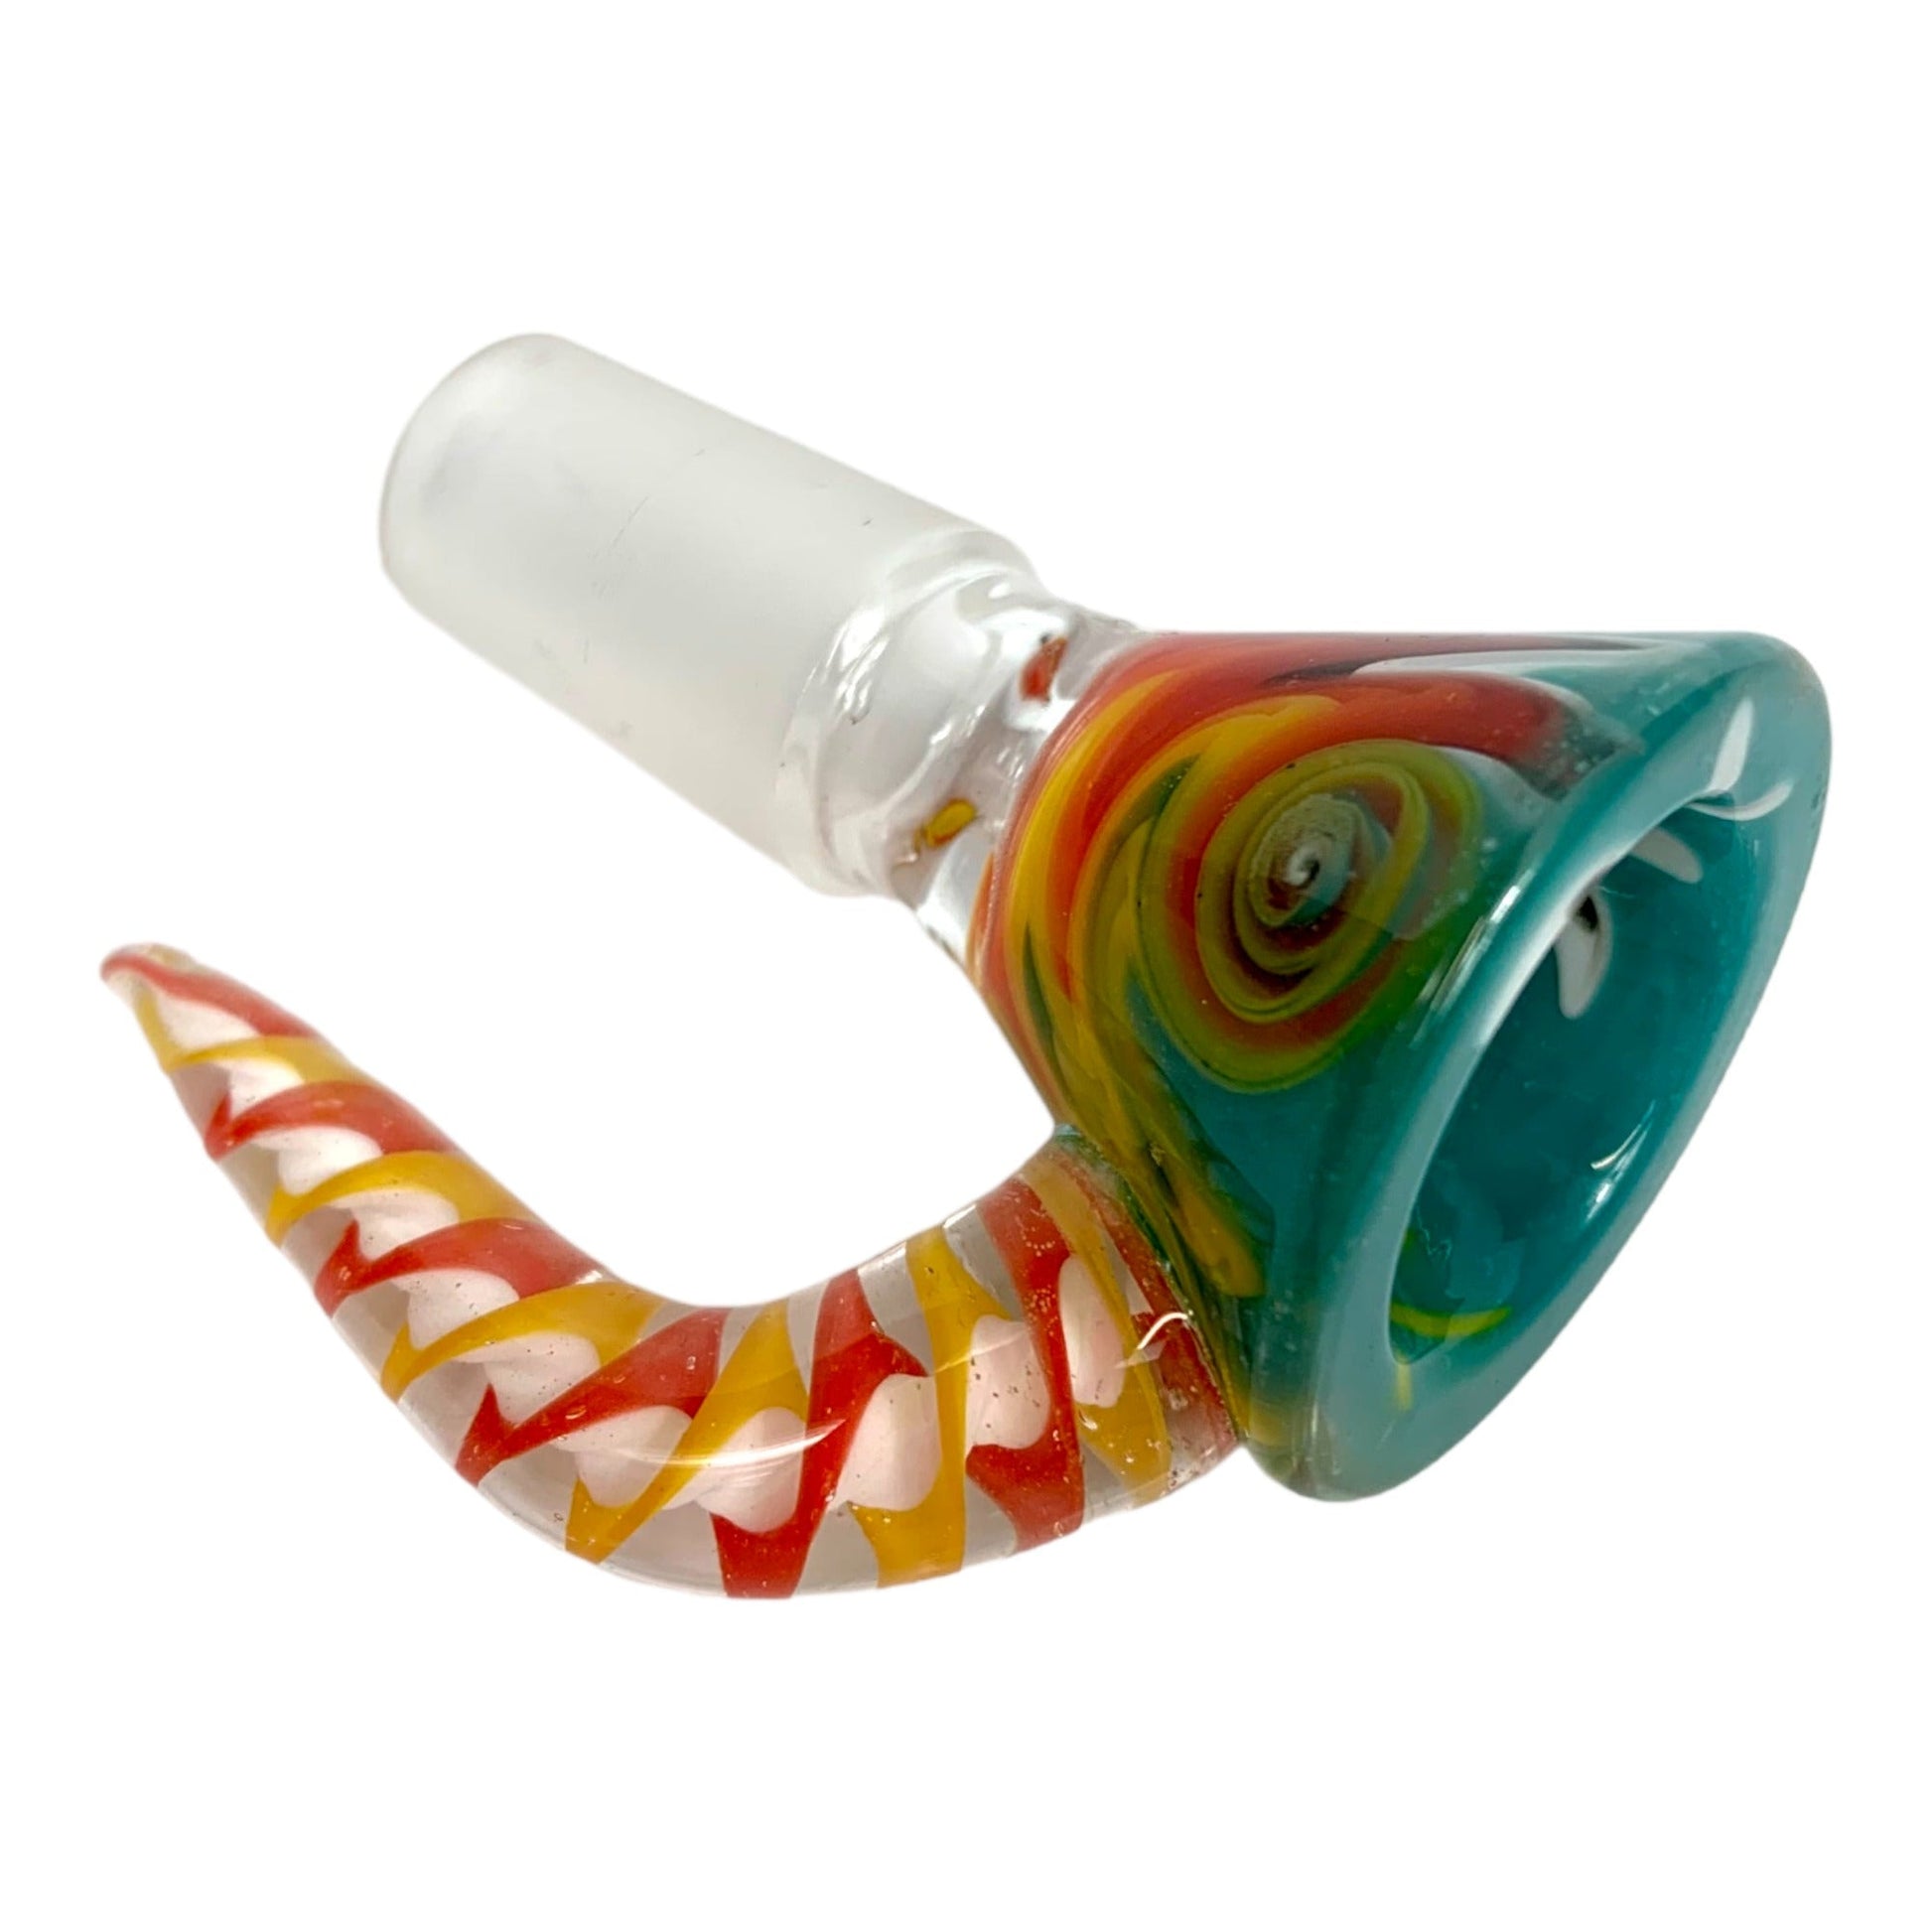 14mm Glass Cone Piece with Rams Horn Style Handle - Yellow and Red Swirl Design - The Bong Baron